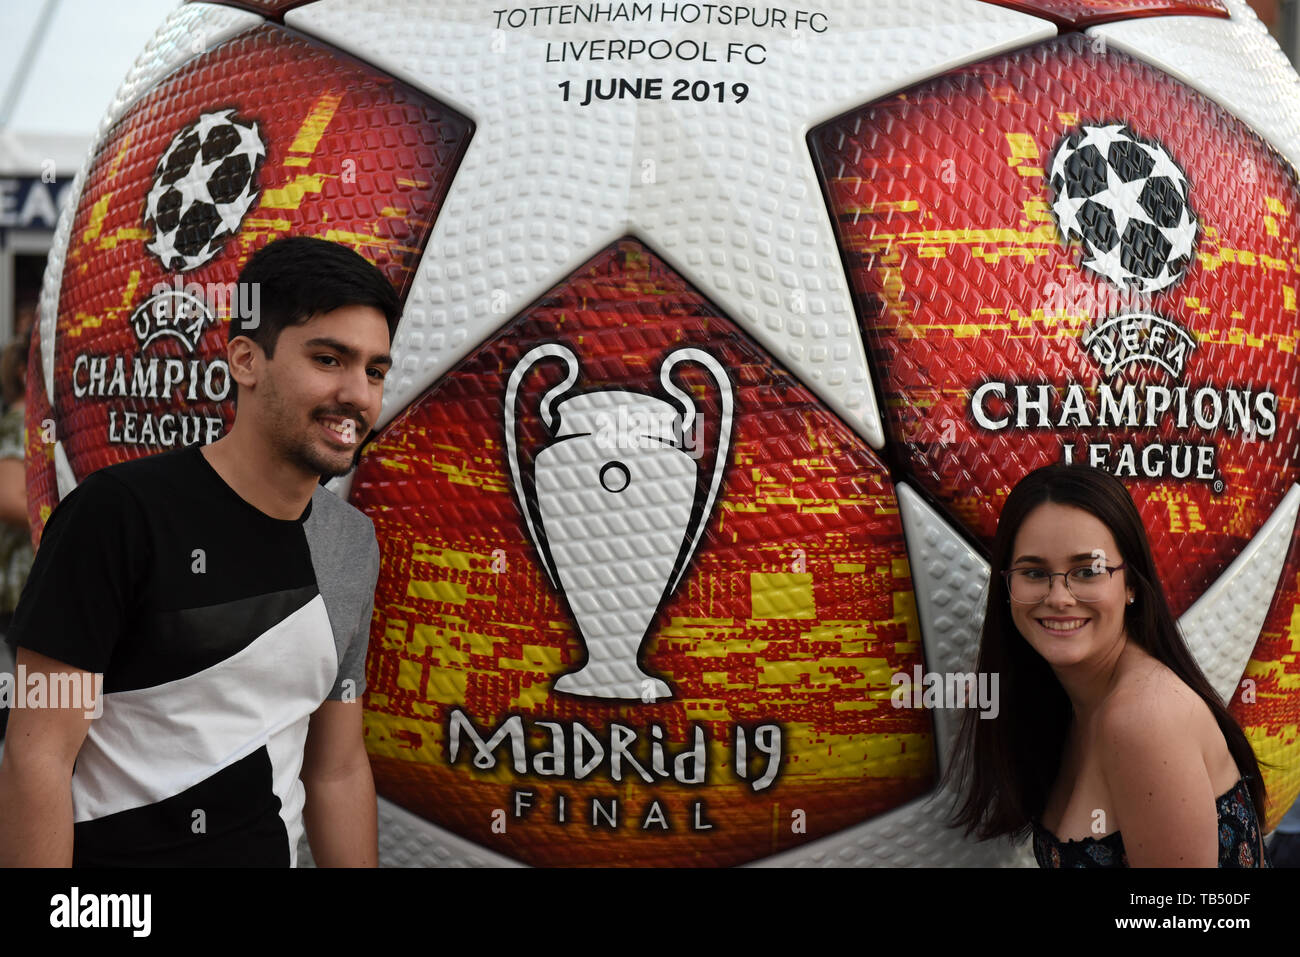 A couple are seen posing for a picture with an advertisement of the 2019 Champions League Final in Madrid. Madrid will host the UEFA Champions League final between Liverpool FC and Tottenham Hotspur on June 1, 2019 at the Wanda Metropolitano Stadium. Stock Photo